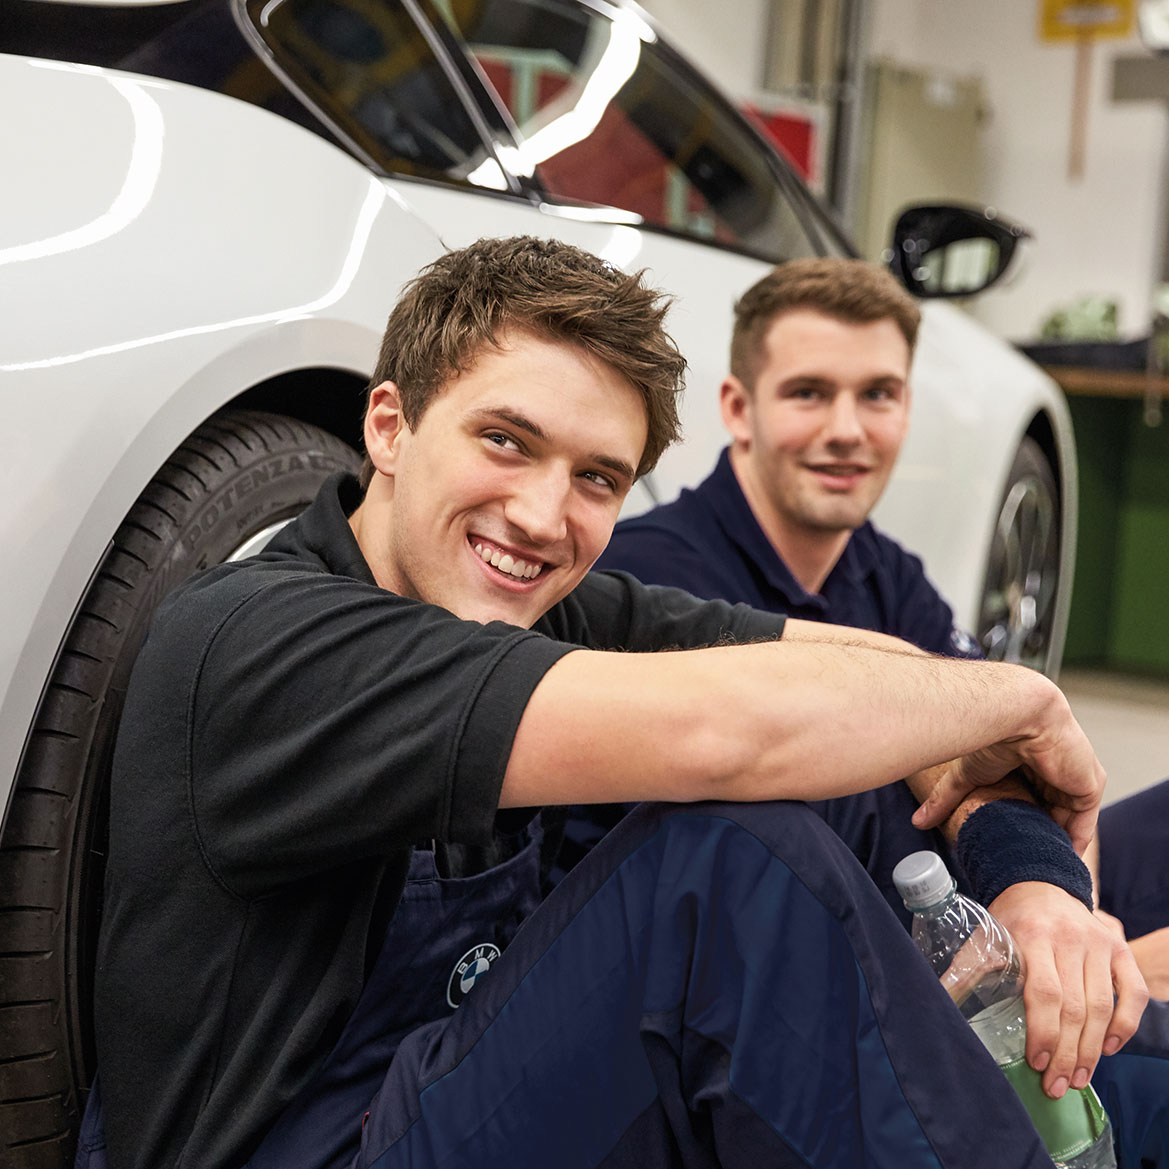 The image shows two apprentices sitting next to a car.